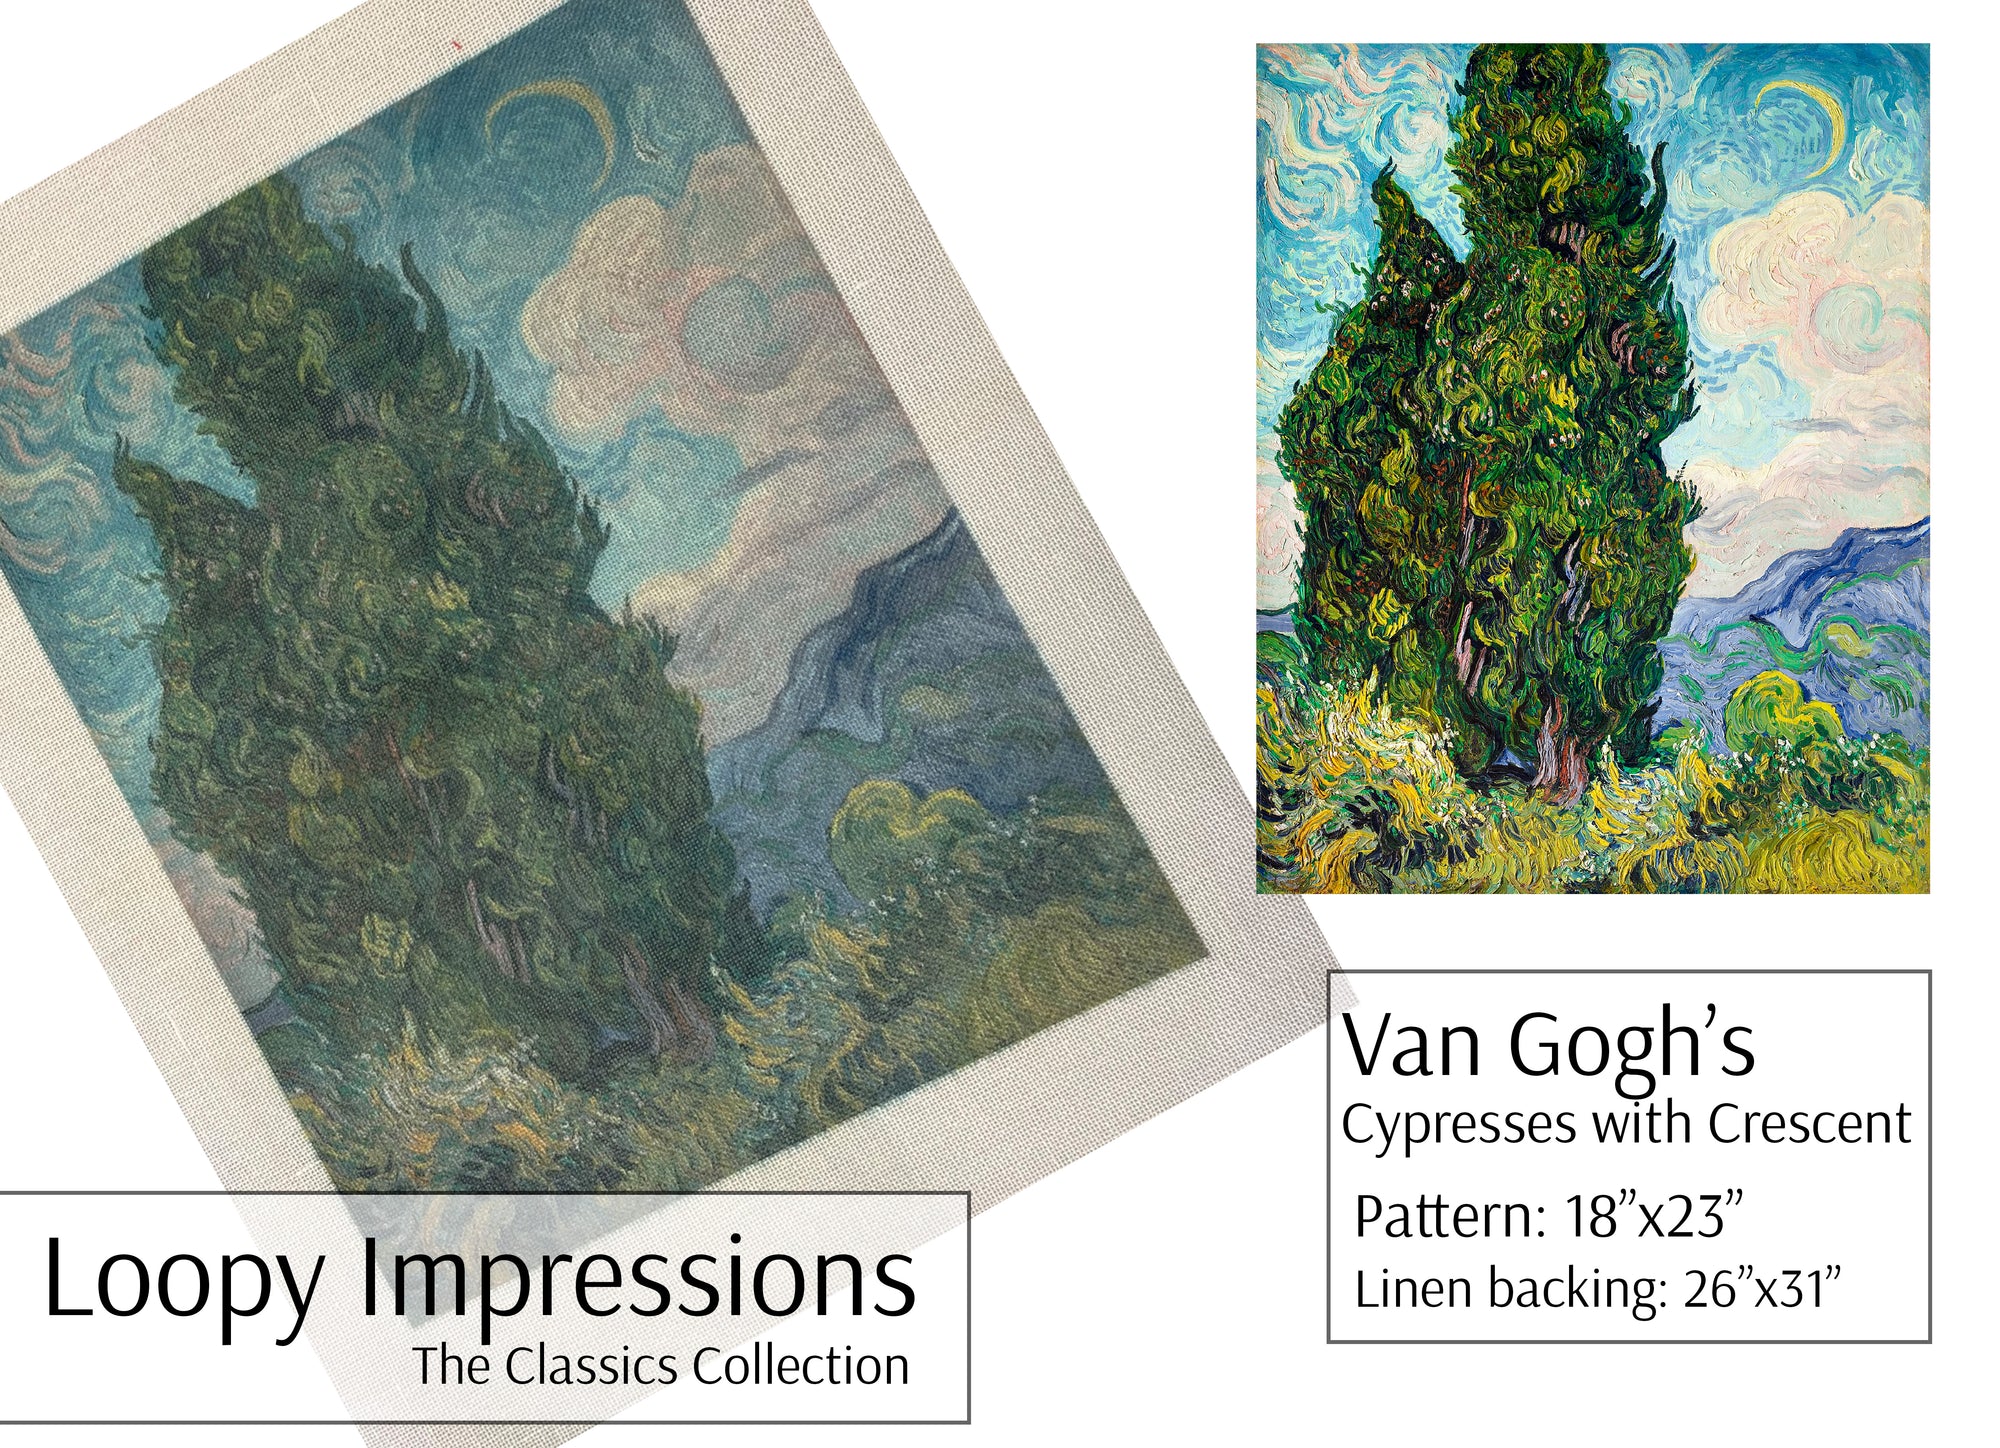 Loopy Impressions Van Gogh's Cypresses with Crescent